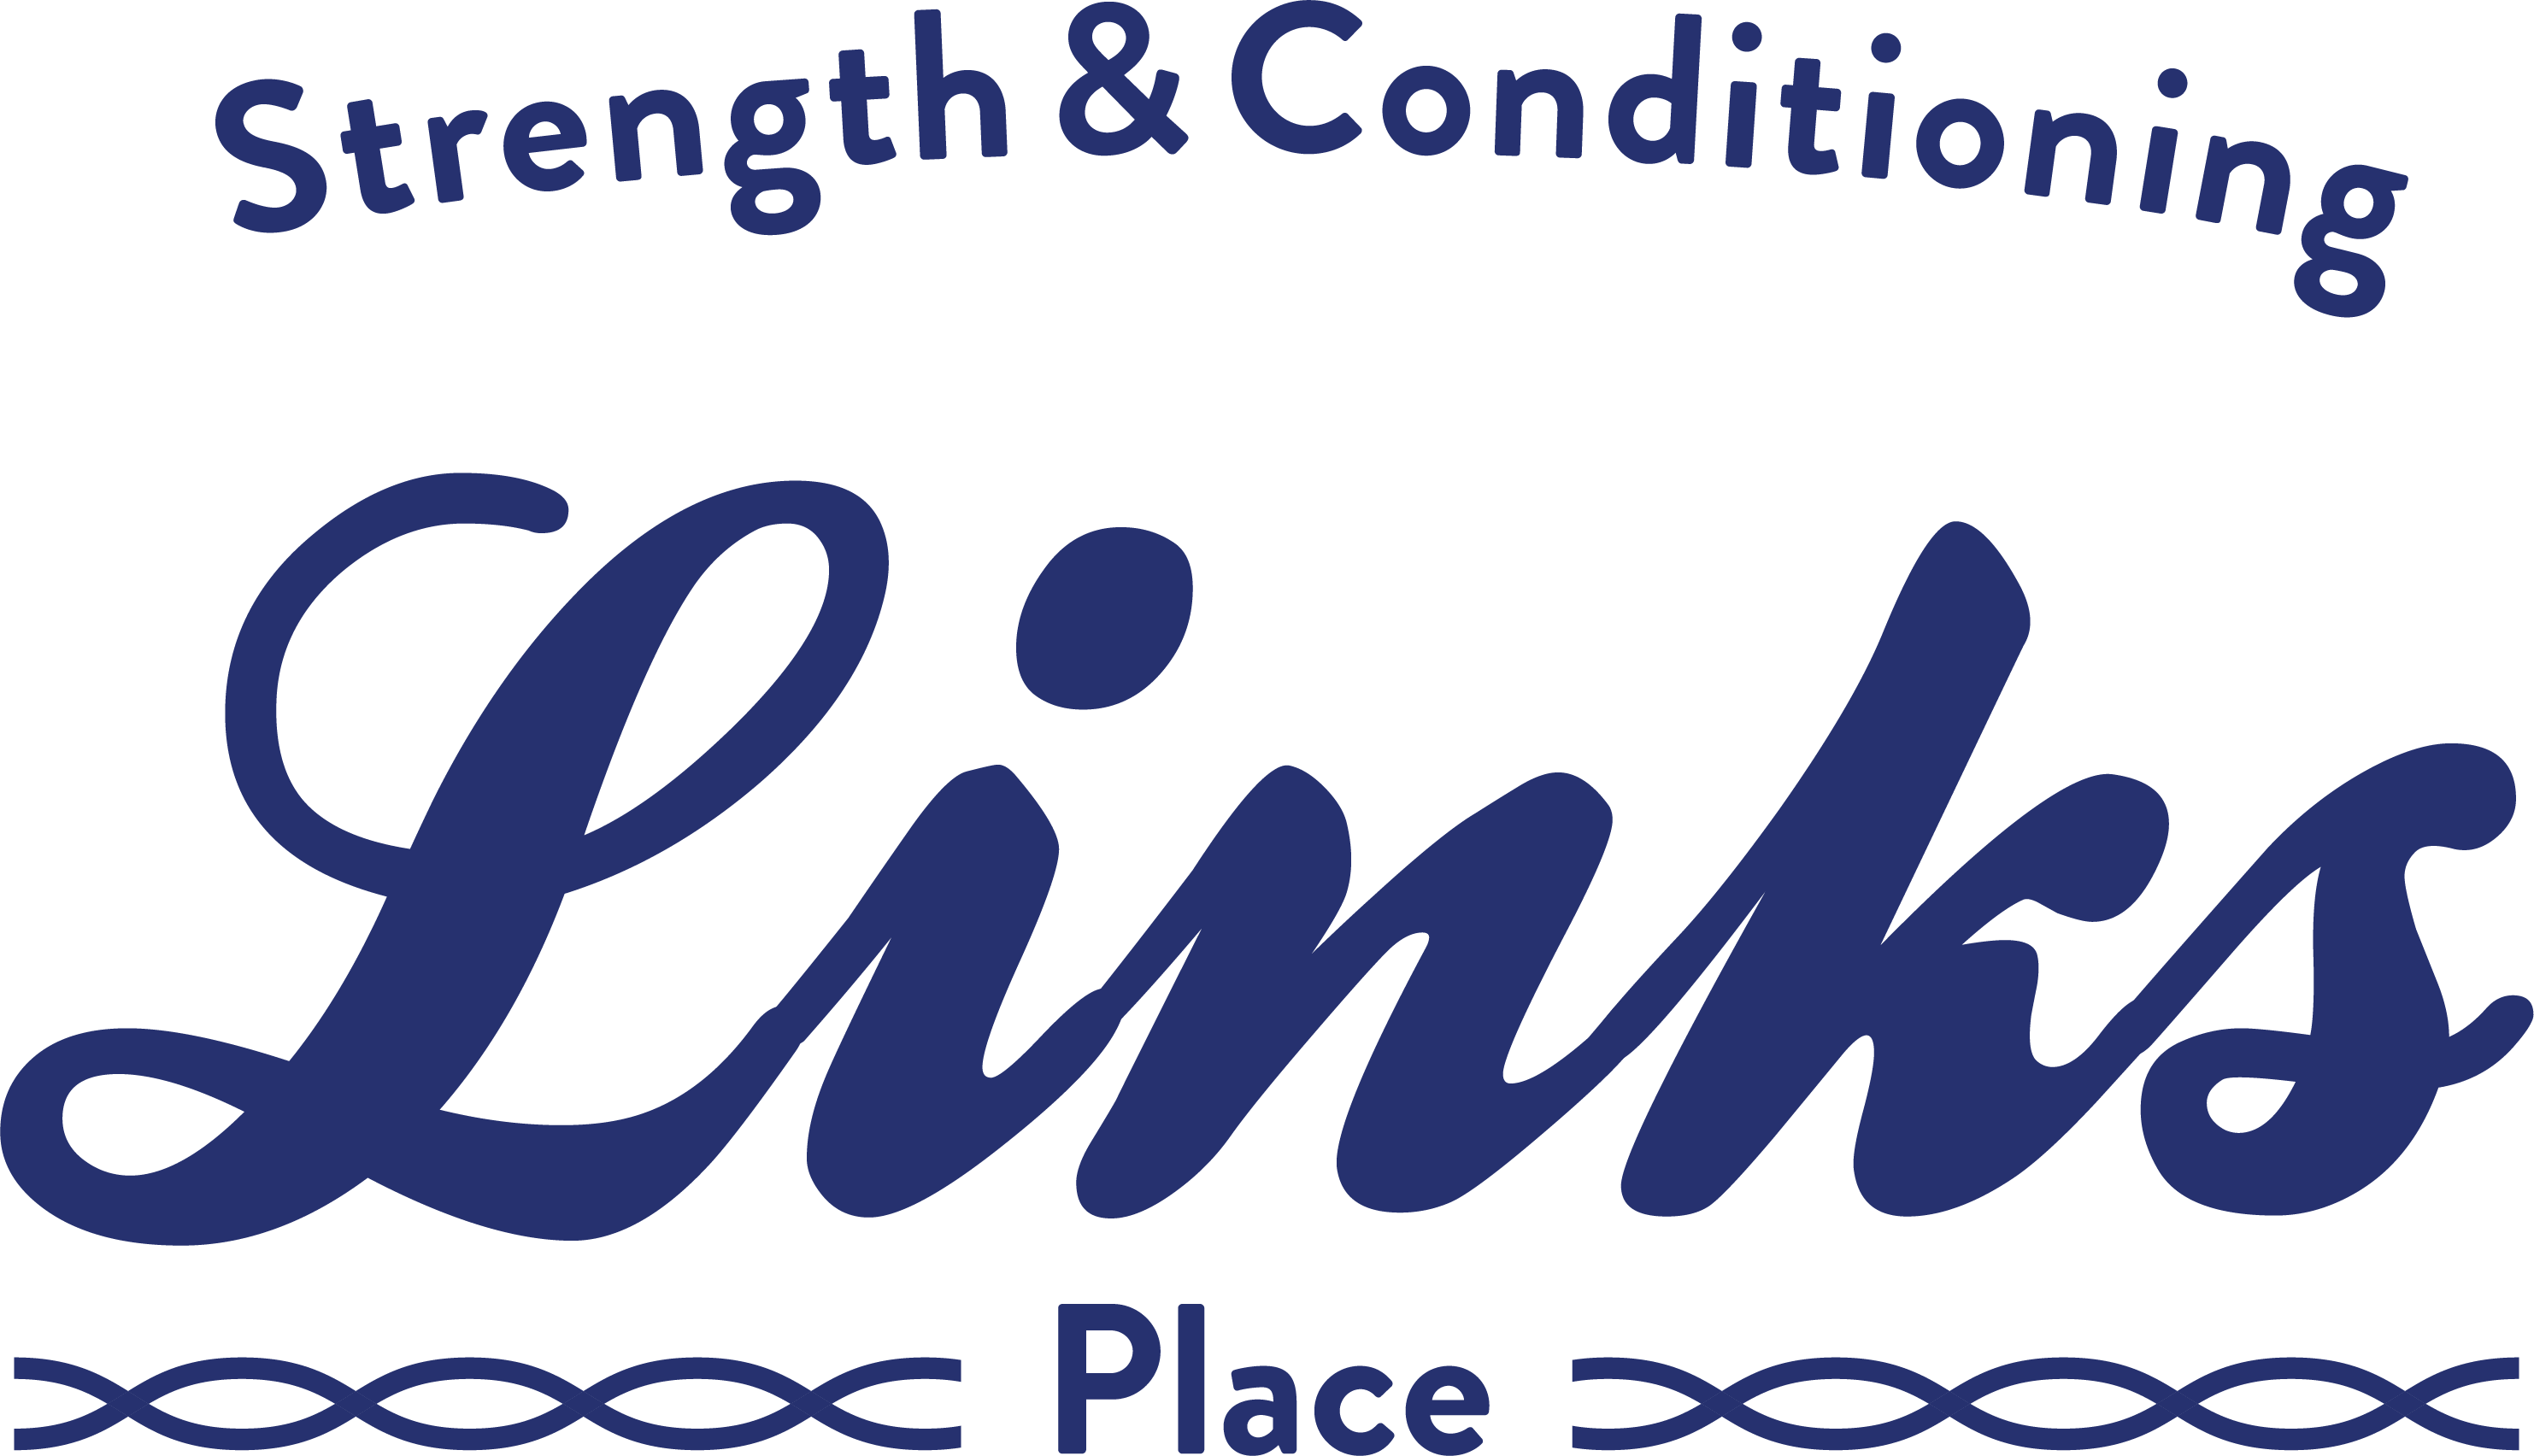 Links S&C Place